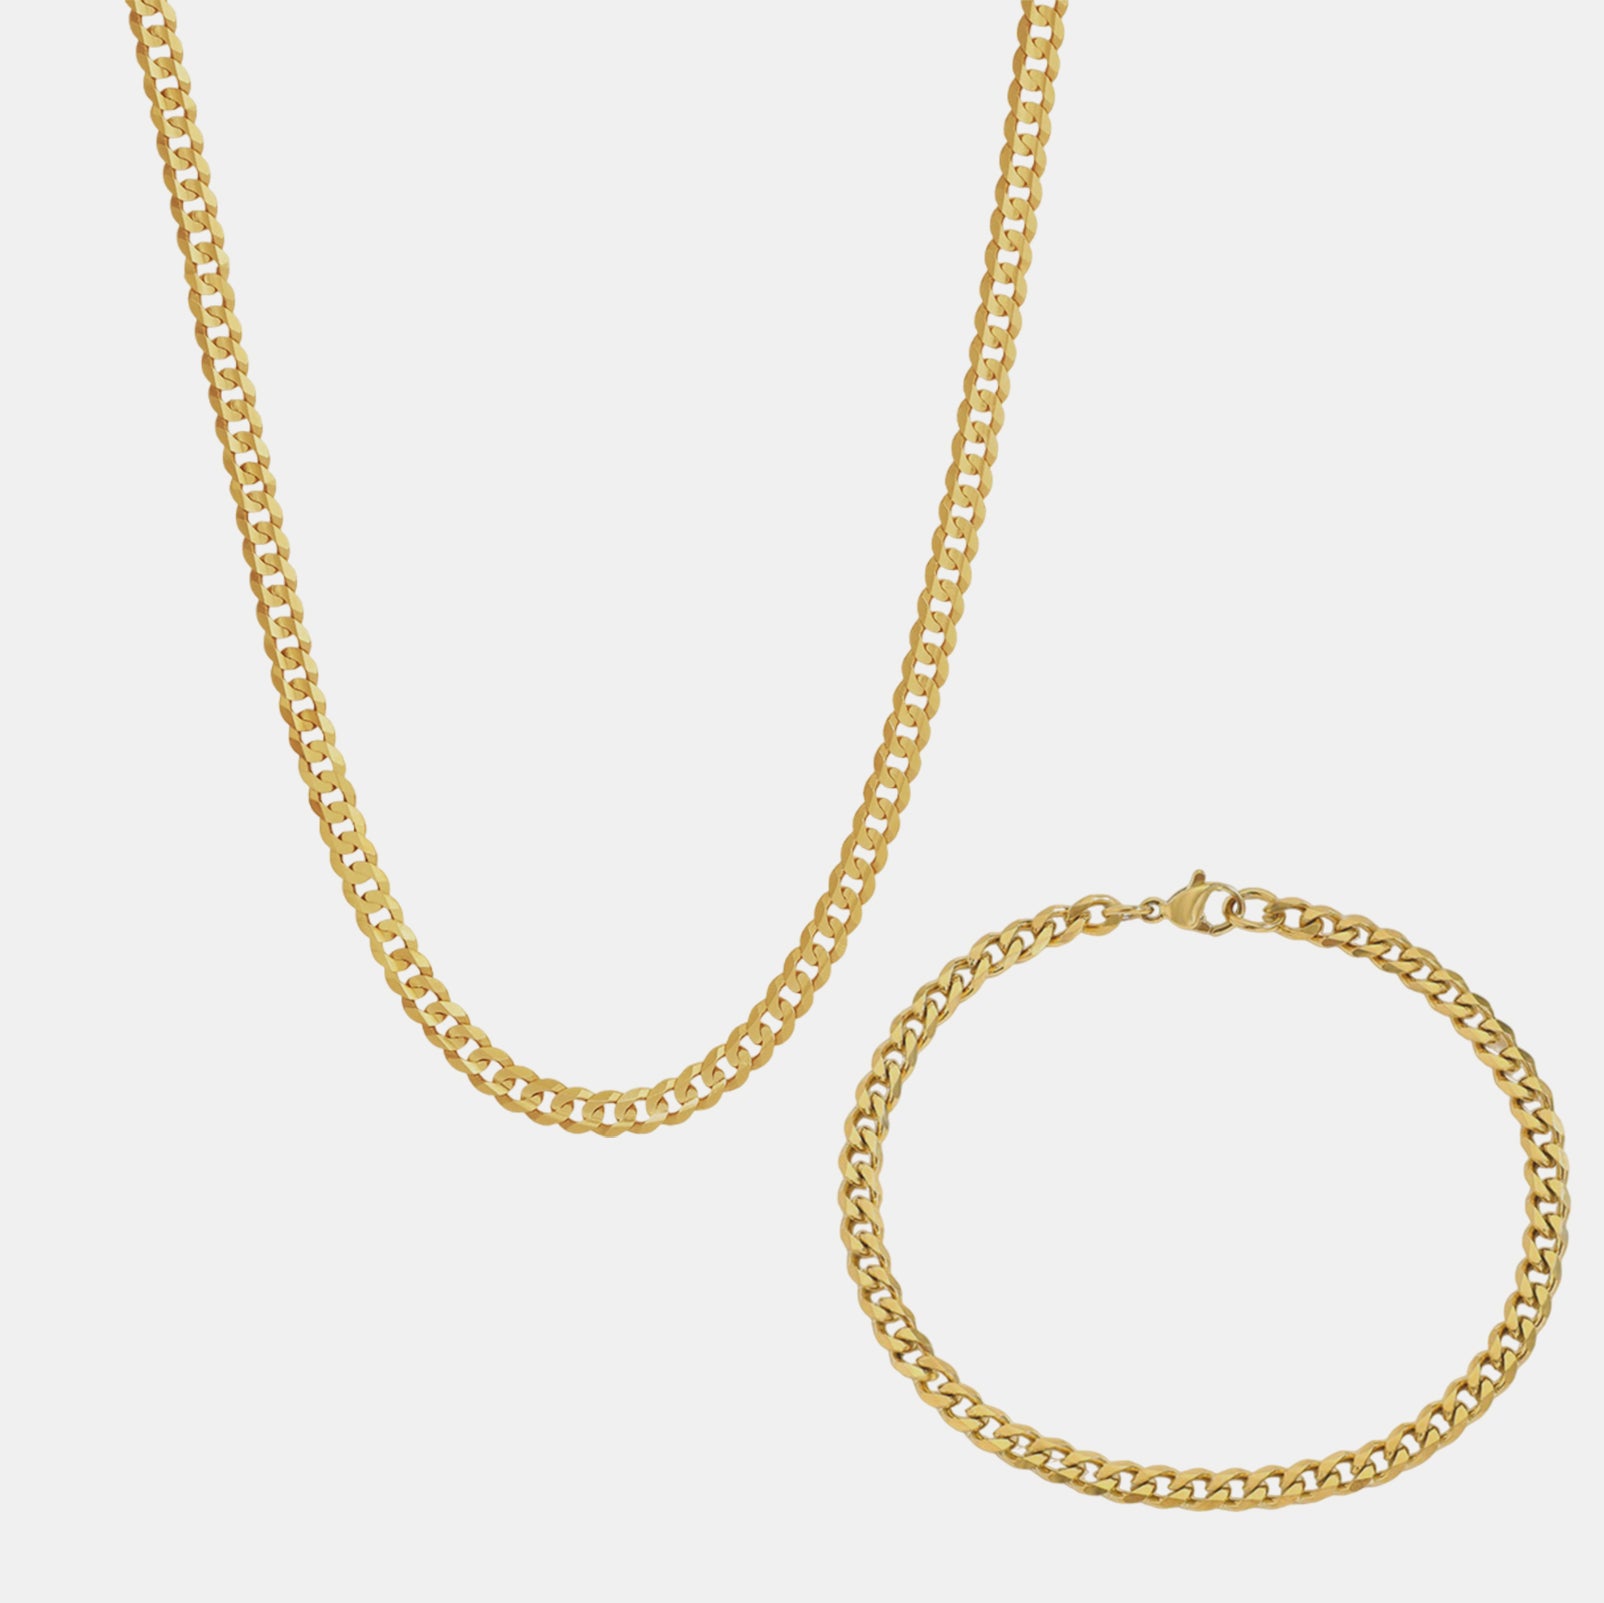 Trick Curb Chain Set , Curb Chain Bracelet and Necklace Set, Matching Curb Chain Jewelry Set , Gold Trick Curb Chain Jewelry , Silver Trick Curb Chain Jewelry, Highlight "Trick Curb Chain" in primary terms , 14k Gold Trick Curb Chain Set , 18k Gold Trick Curb Chain Set , Sterling Silver Trick Curb Chain Set , Rose Gold Trick Curb Chain Set , How to clean Trick Curb Chain Jewelry, Best Trick Curb Chain Jewelry for everyday wear,